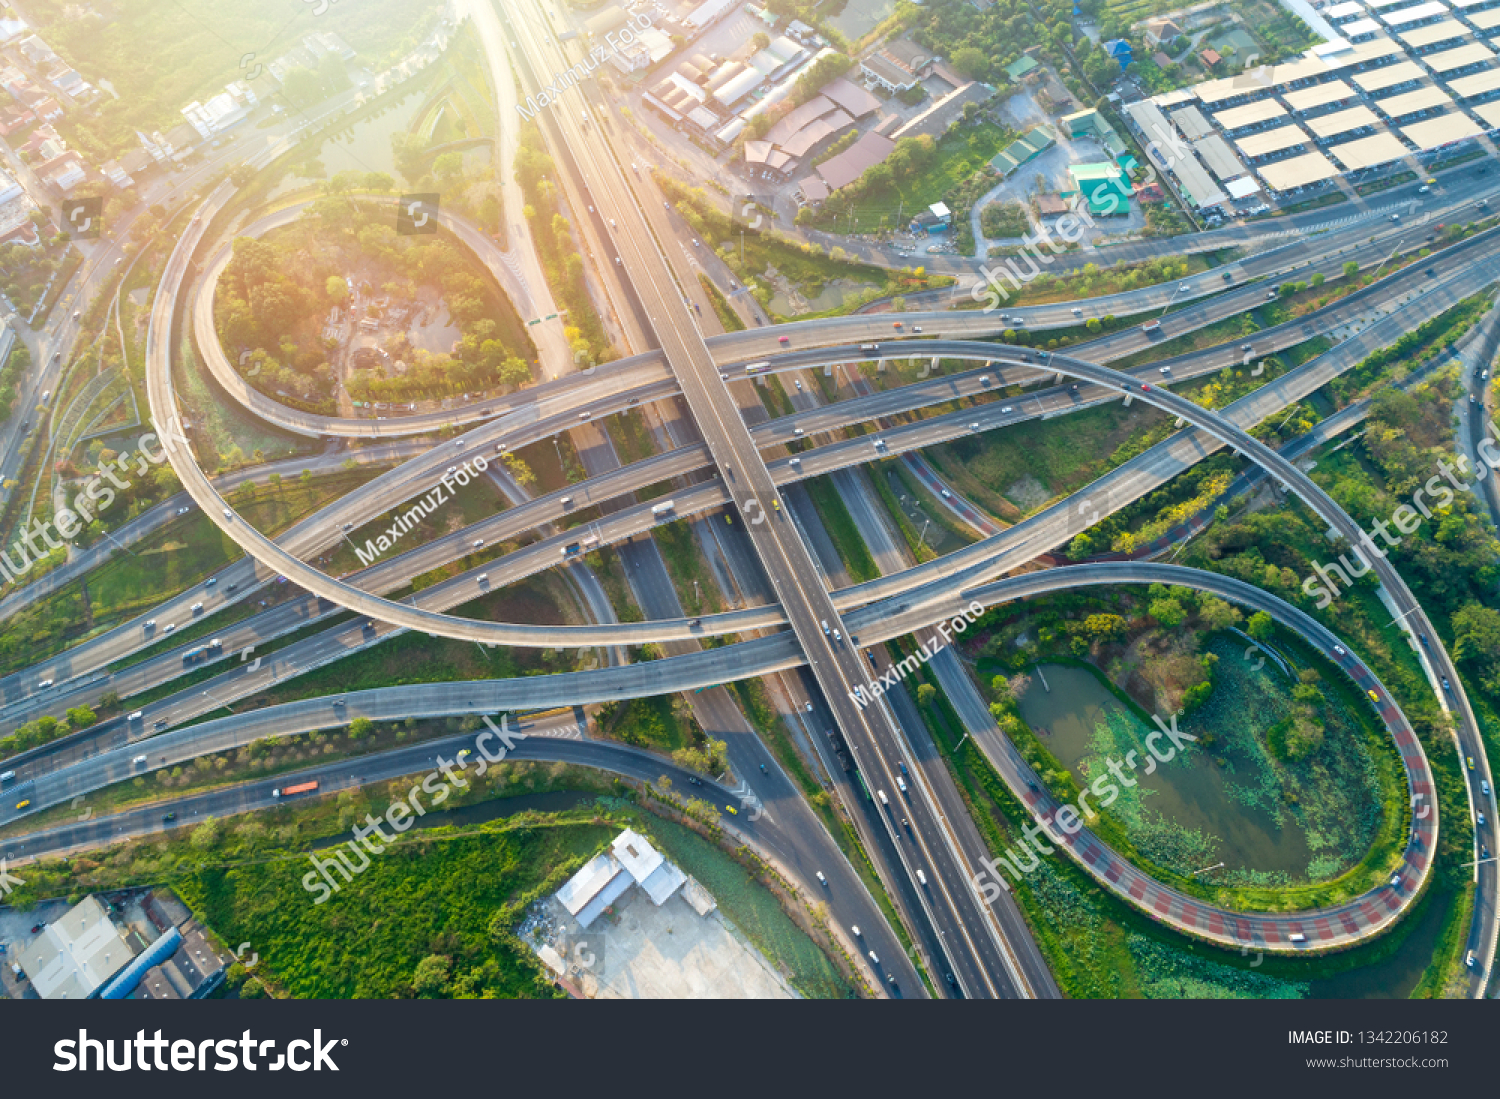 Bangkok Expressway top view, Top view over the highway,expressway and motorway at night, Aerial view interchange of a city, Shot from drone, Expressway is an important infrastructure in Thailand #1342206182